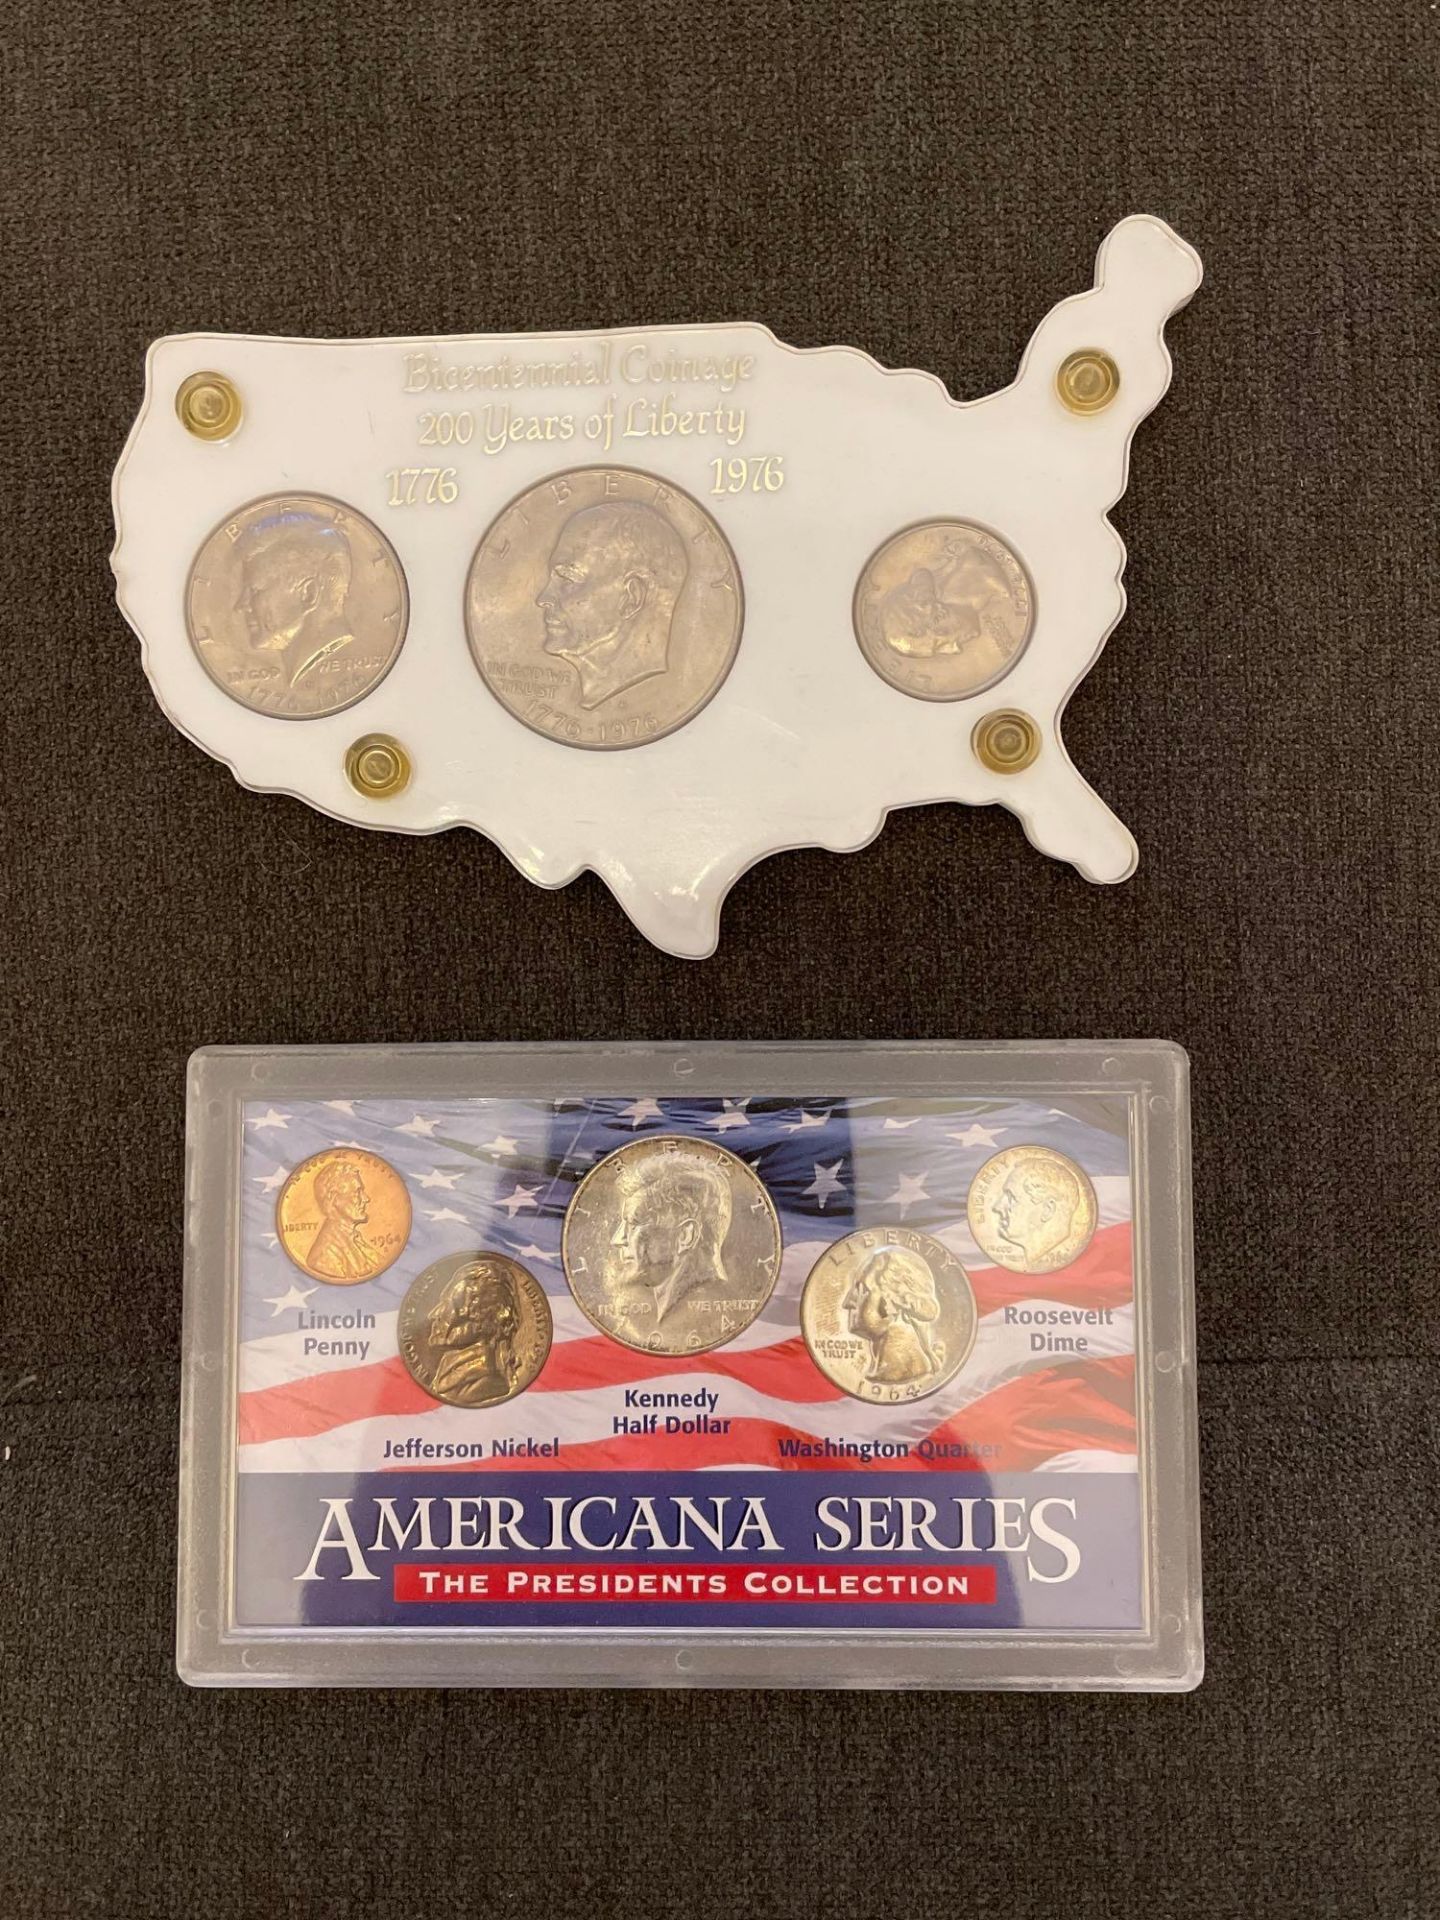 1964 Americana Series The Presidents Collection & Bicentennial Coinage 200 Years of Liberty 1776-197